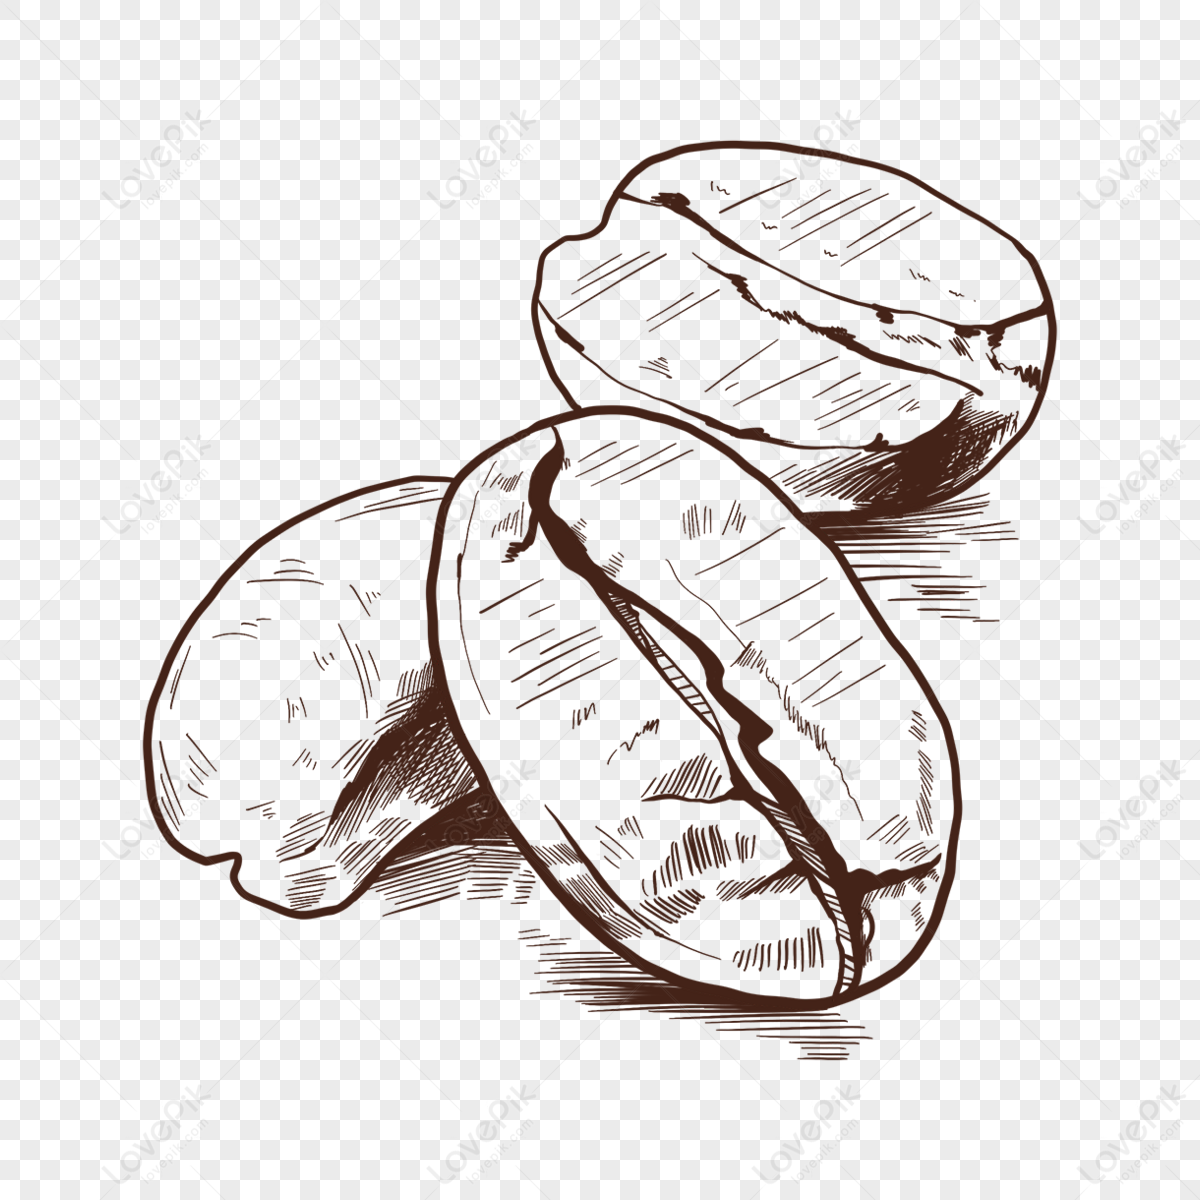 Coffee Bean Drawing PNG Transparent, Black And White Line Drawing Coffee  Bean Illustration Element, Coffee Drawing, Wing Drawing, Rat Drawing PNG  Image For Free Download